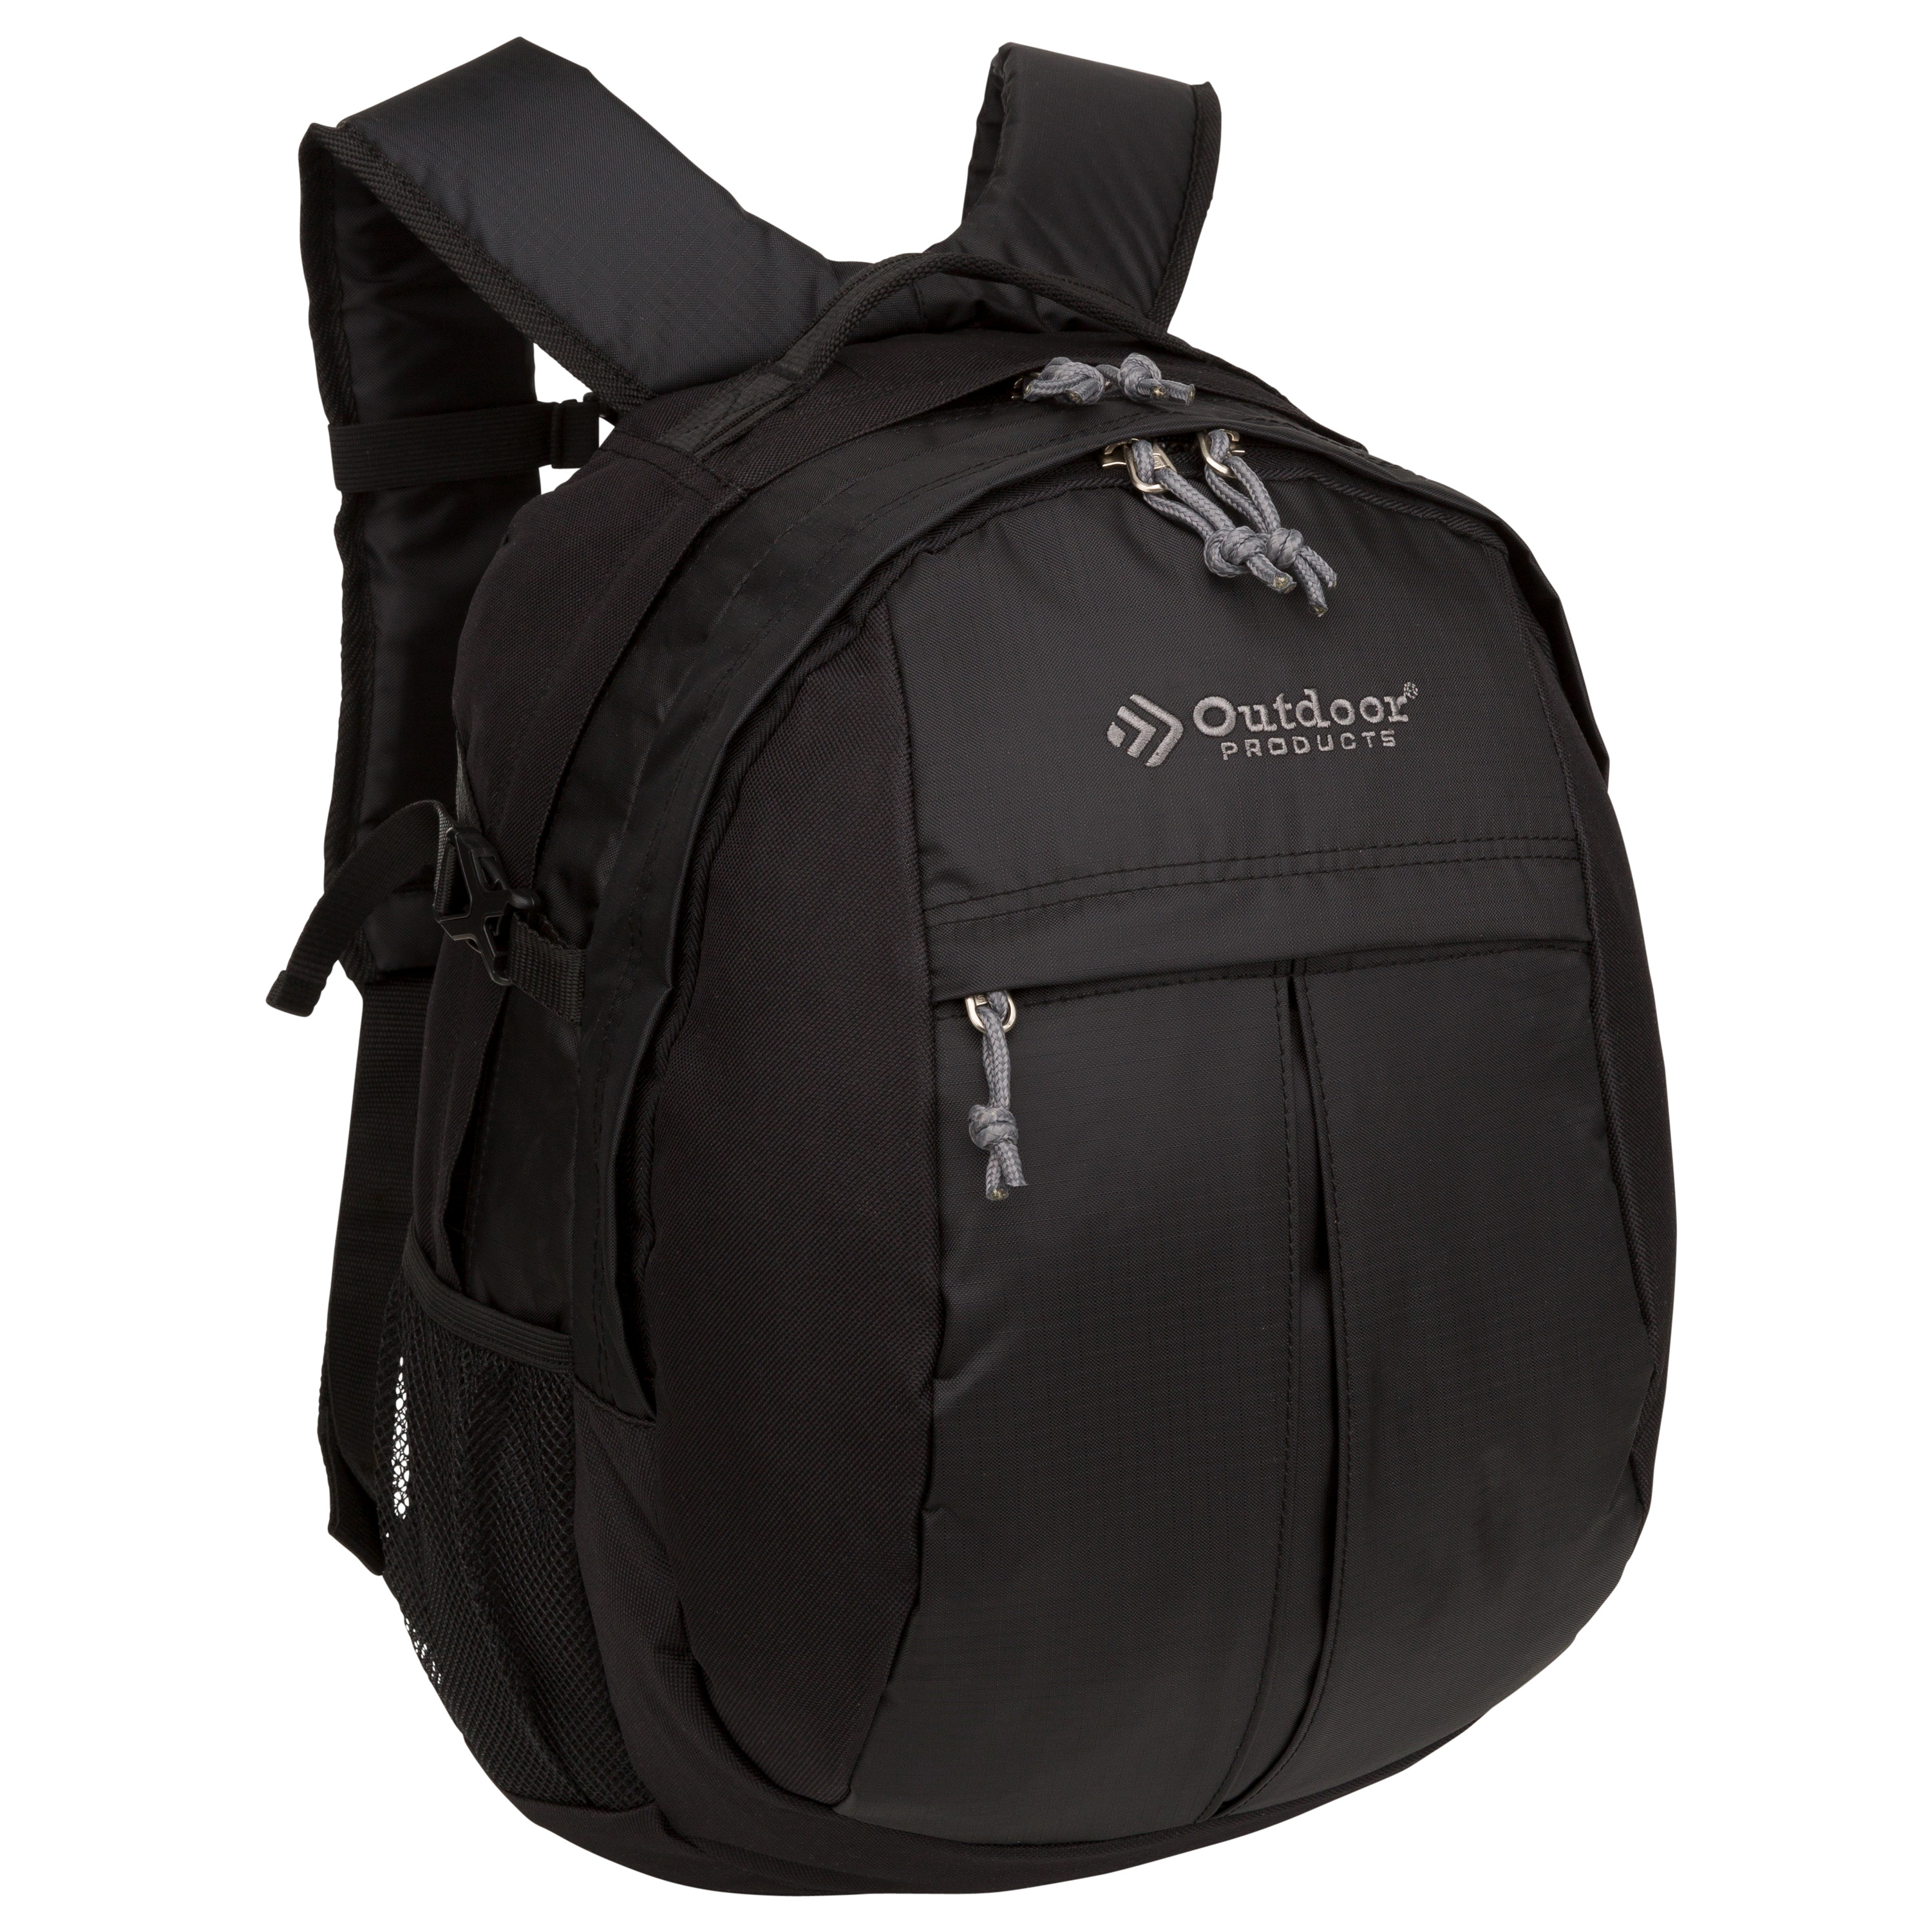 Outdoor Products 25 Ltr Traverse Backpack, Black, Unisex, Adult, Teen, Polyester - image 3 of 15